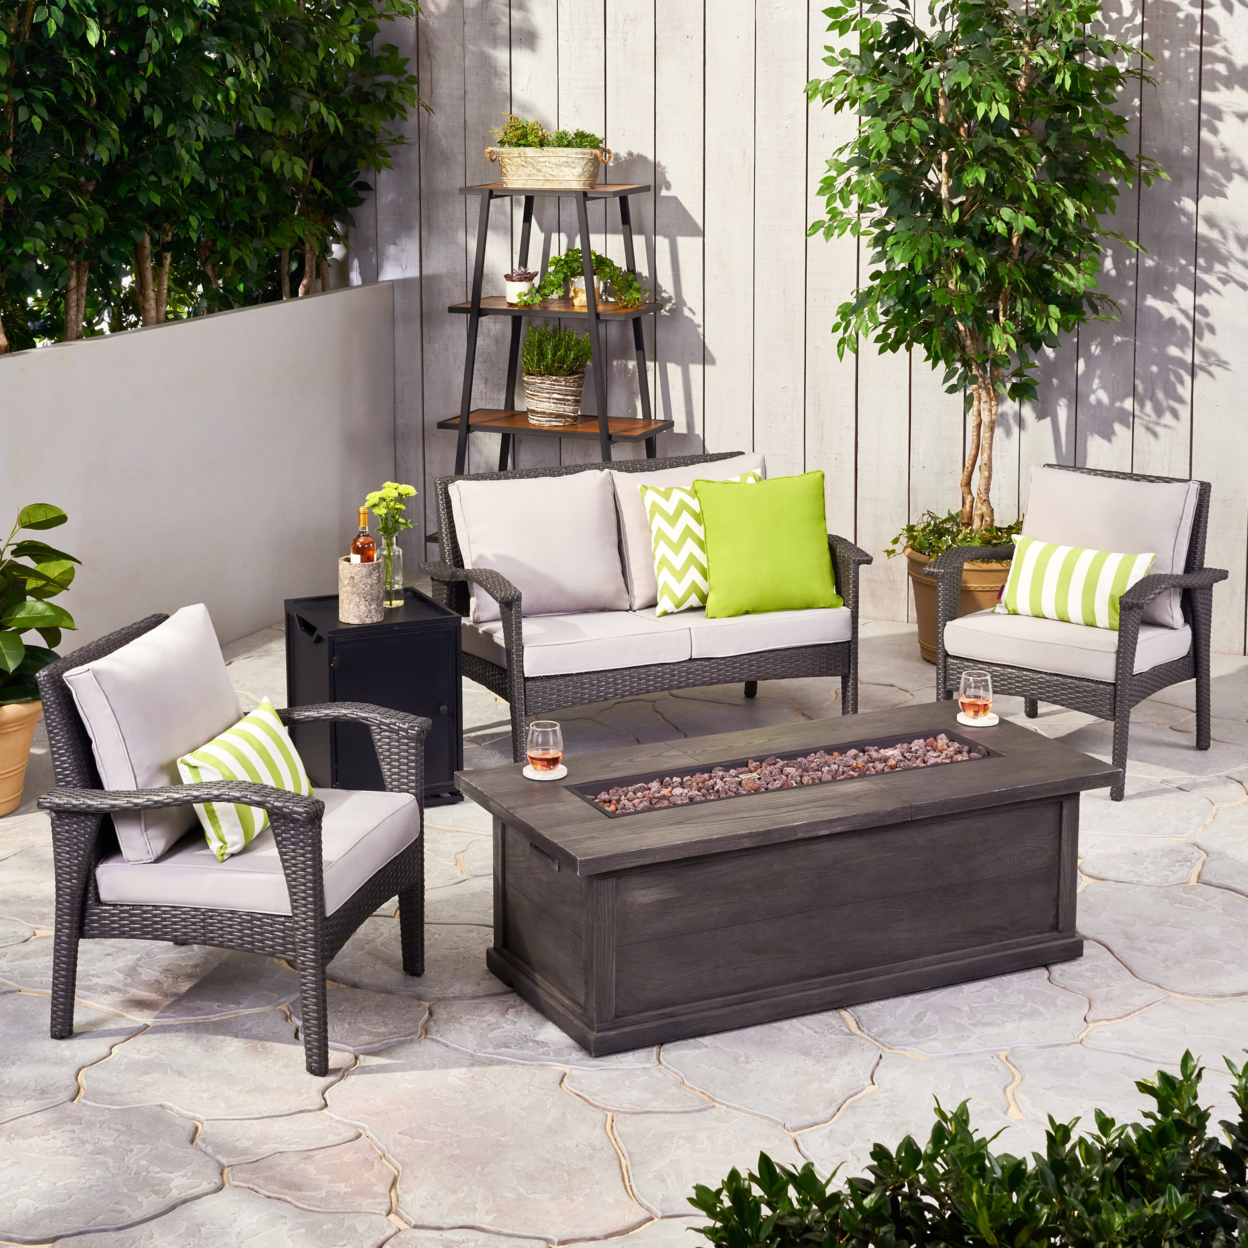 Eleanore Outdoor 4 Seater Wicker Chat Set With Fire Pit - Gray + Light Gray + Black